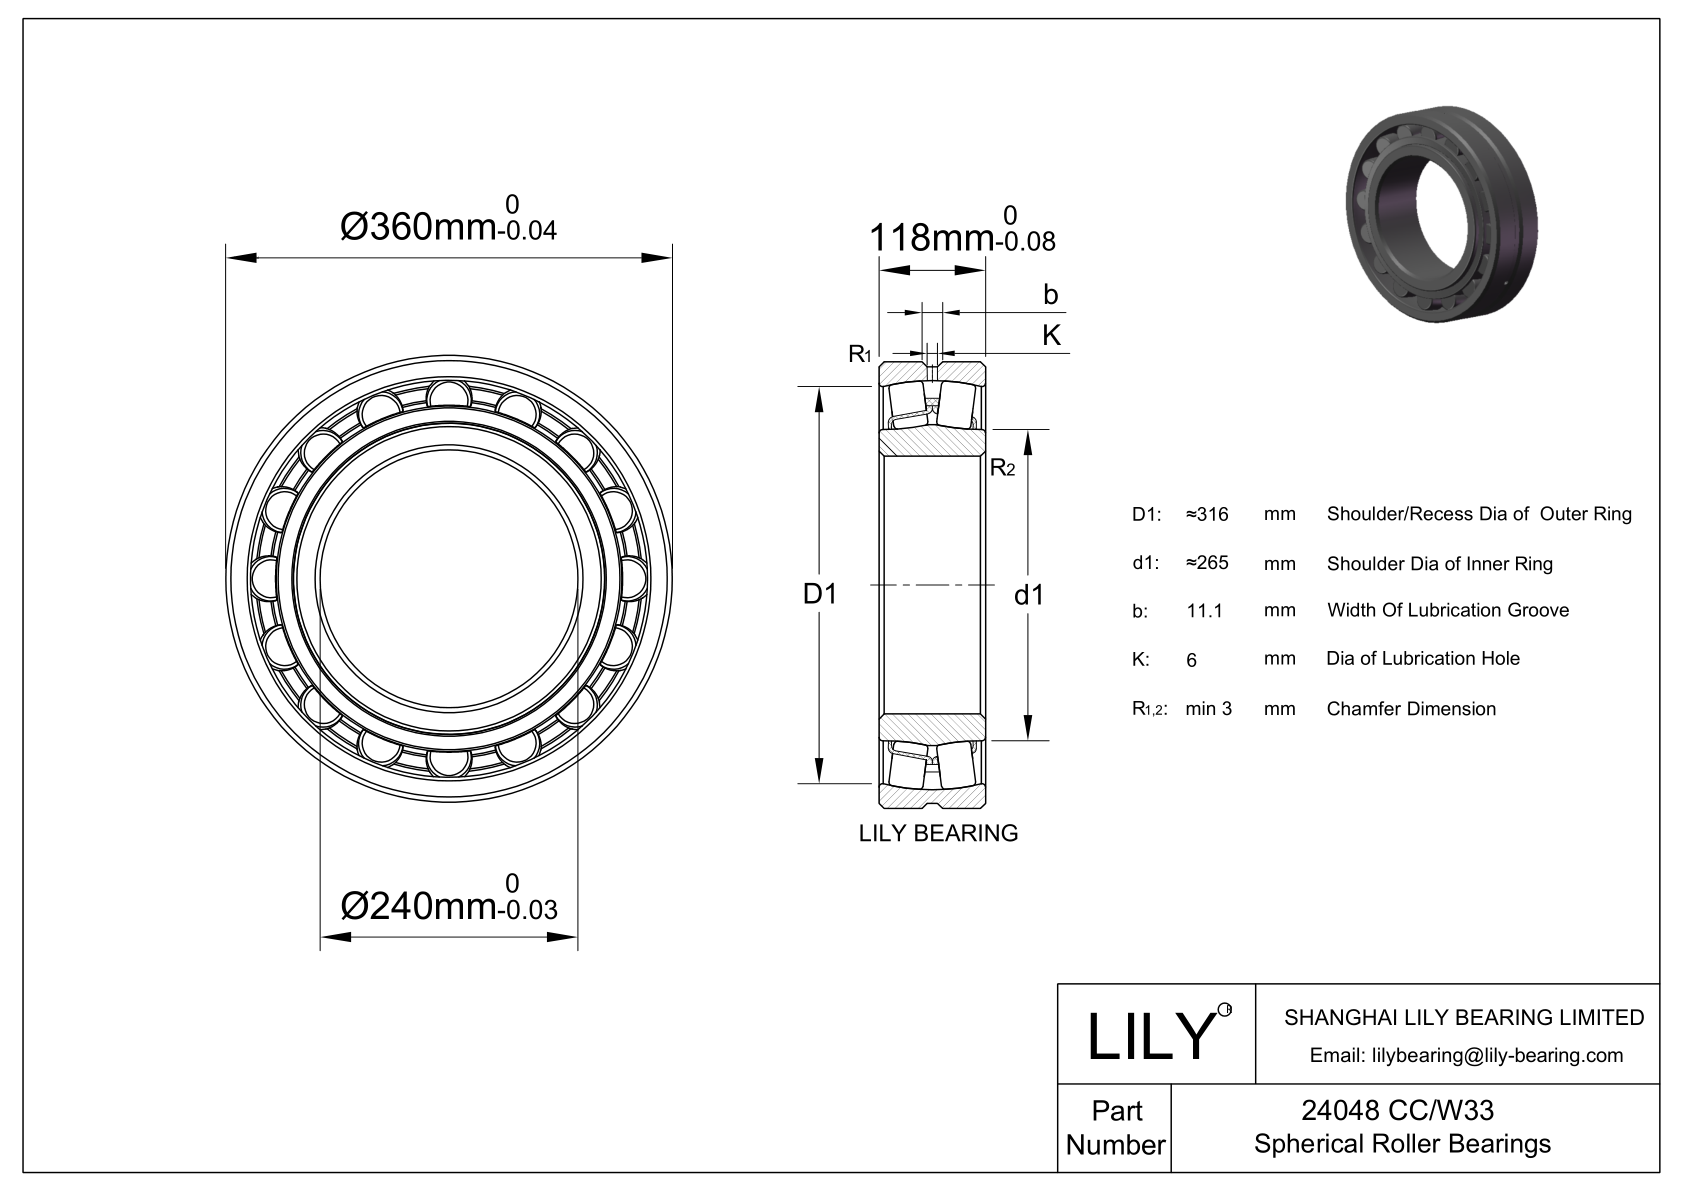 24048 CC/W33 Double Row Spherical Roller Bearing cad drawing